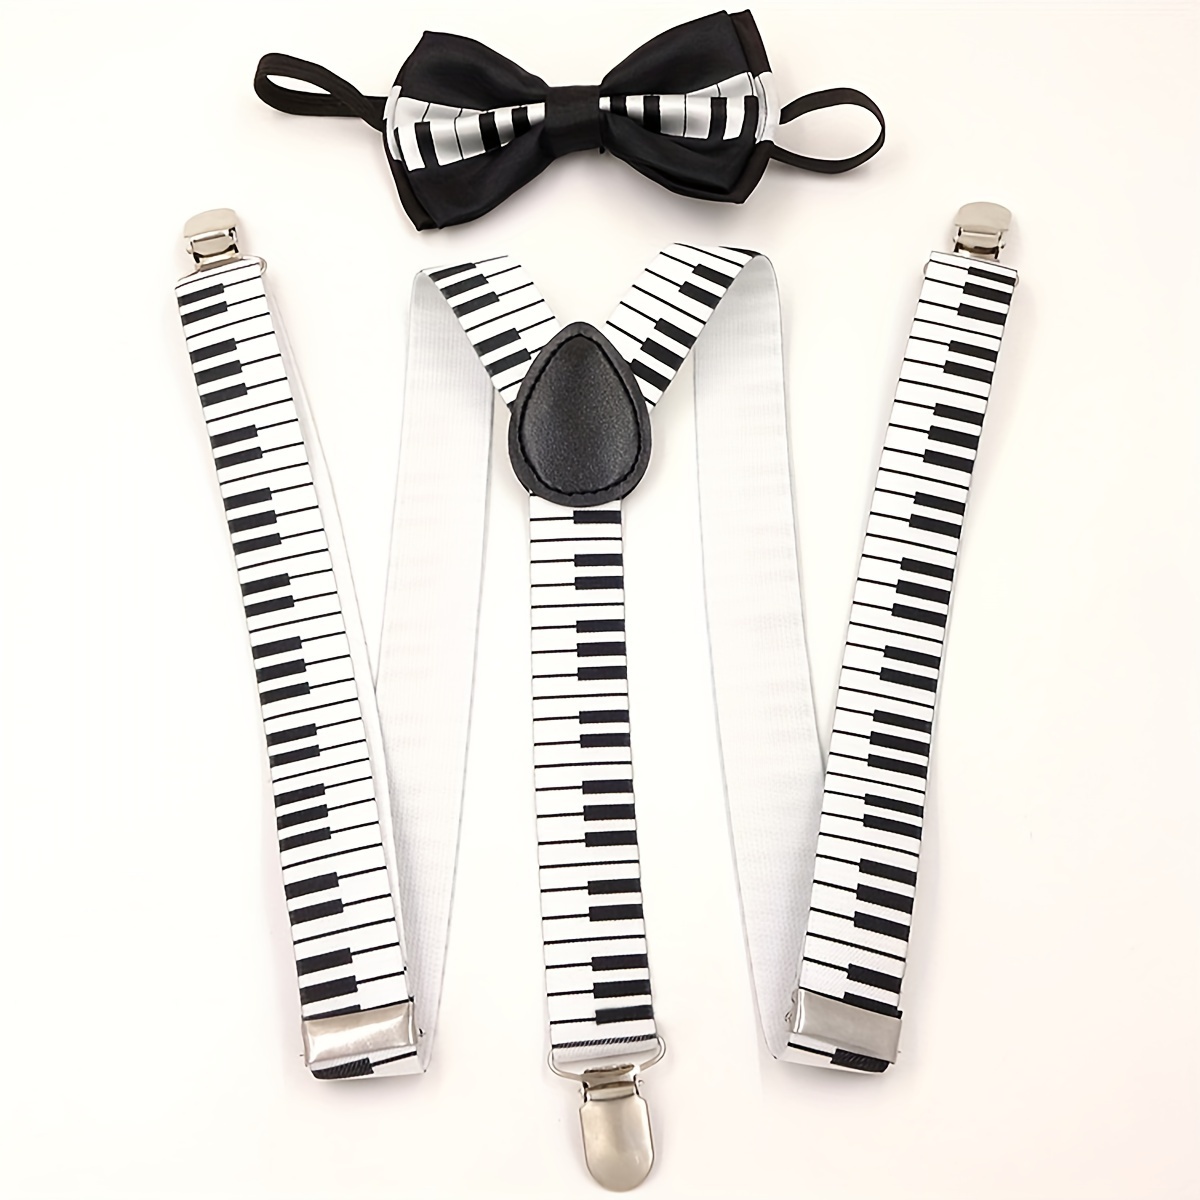 

1 Set Adjustable Piano Keyboard Pattern Suspenders And Bow Tie Set, Costume Accessory, Music Party Supplie, Men's Suspenders, Music Teacher Gift